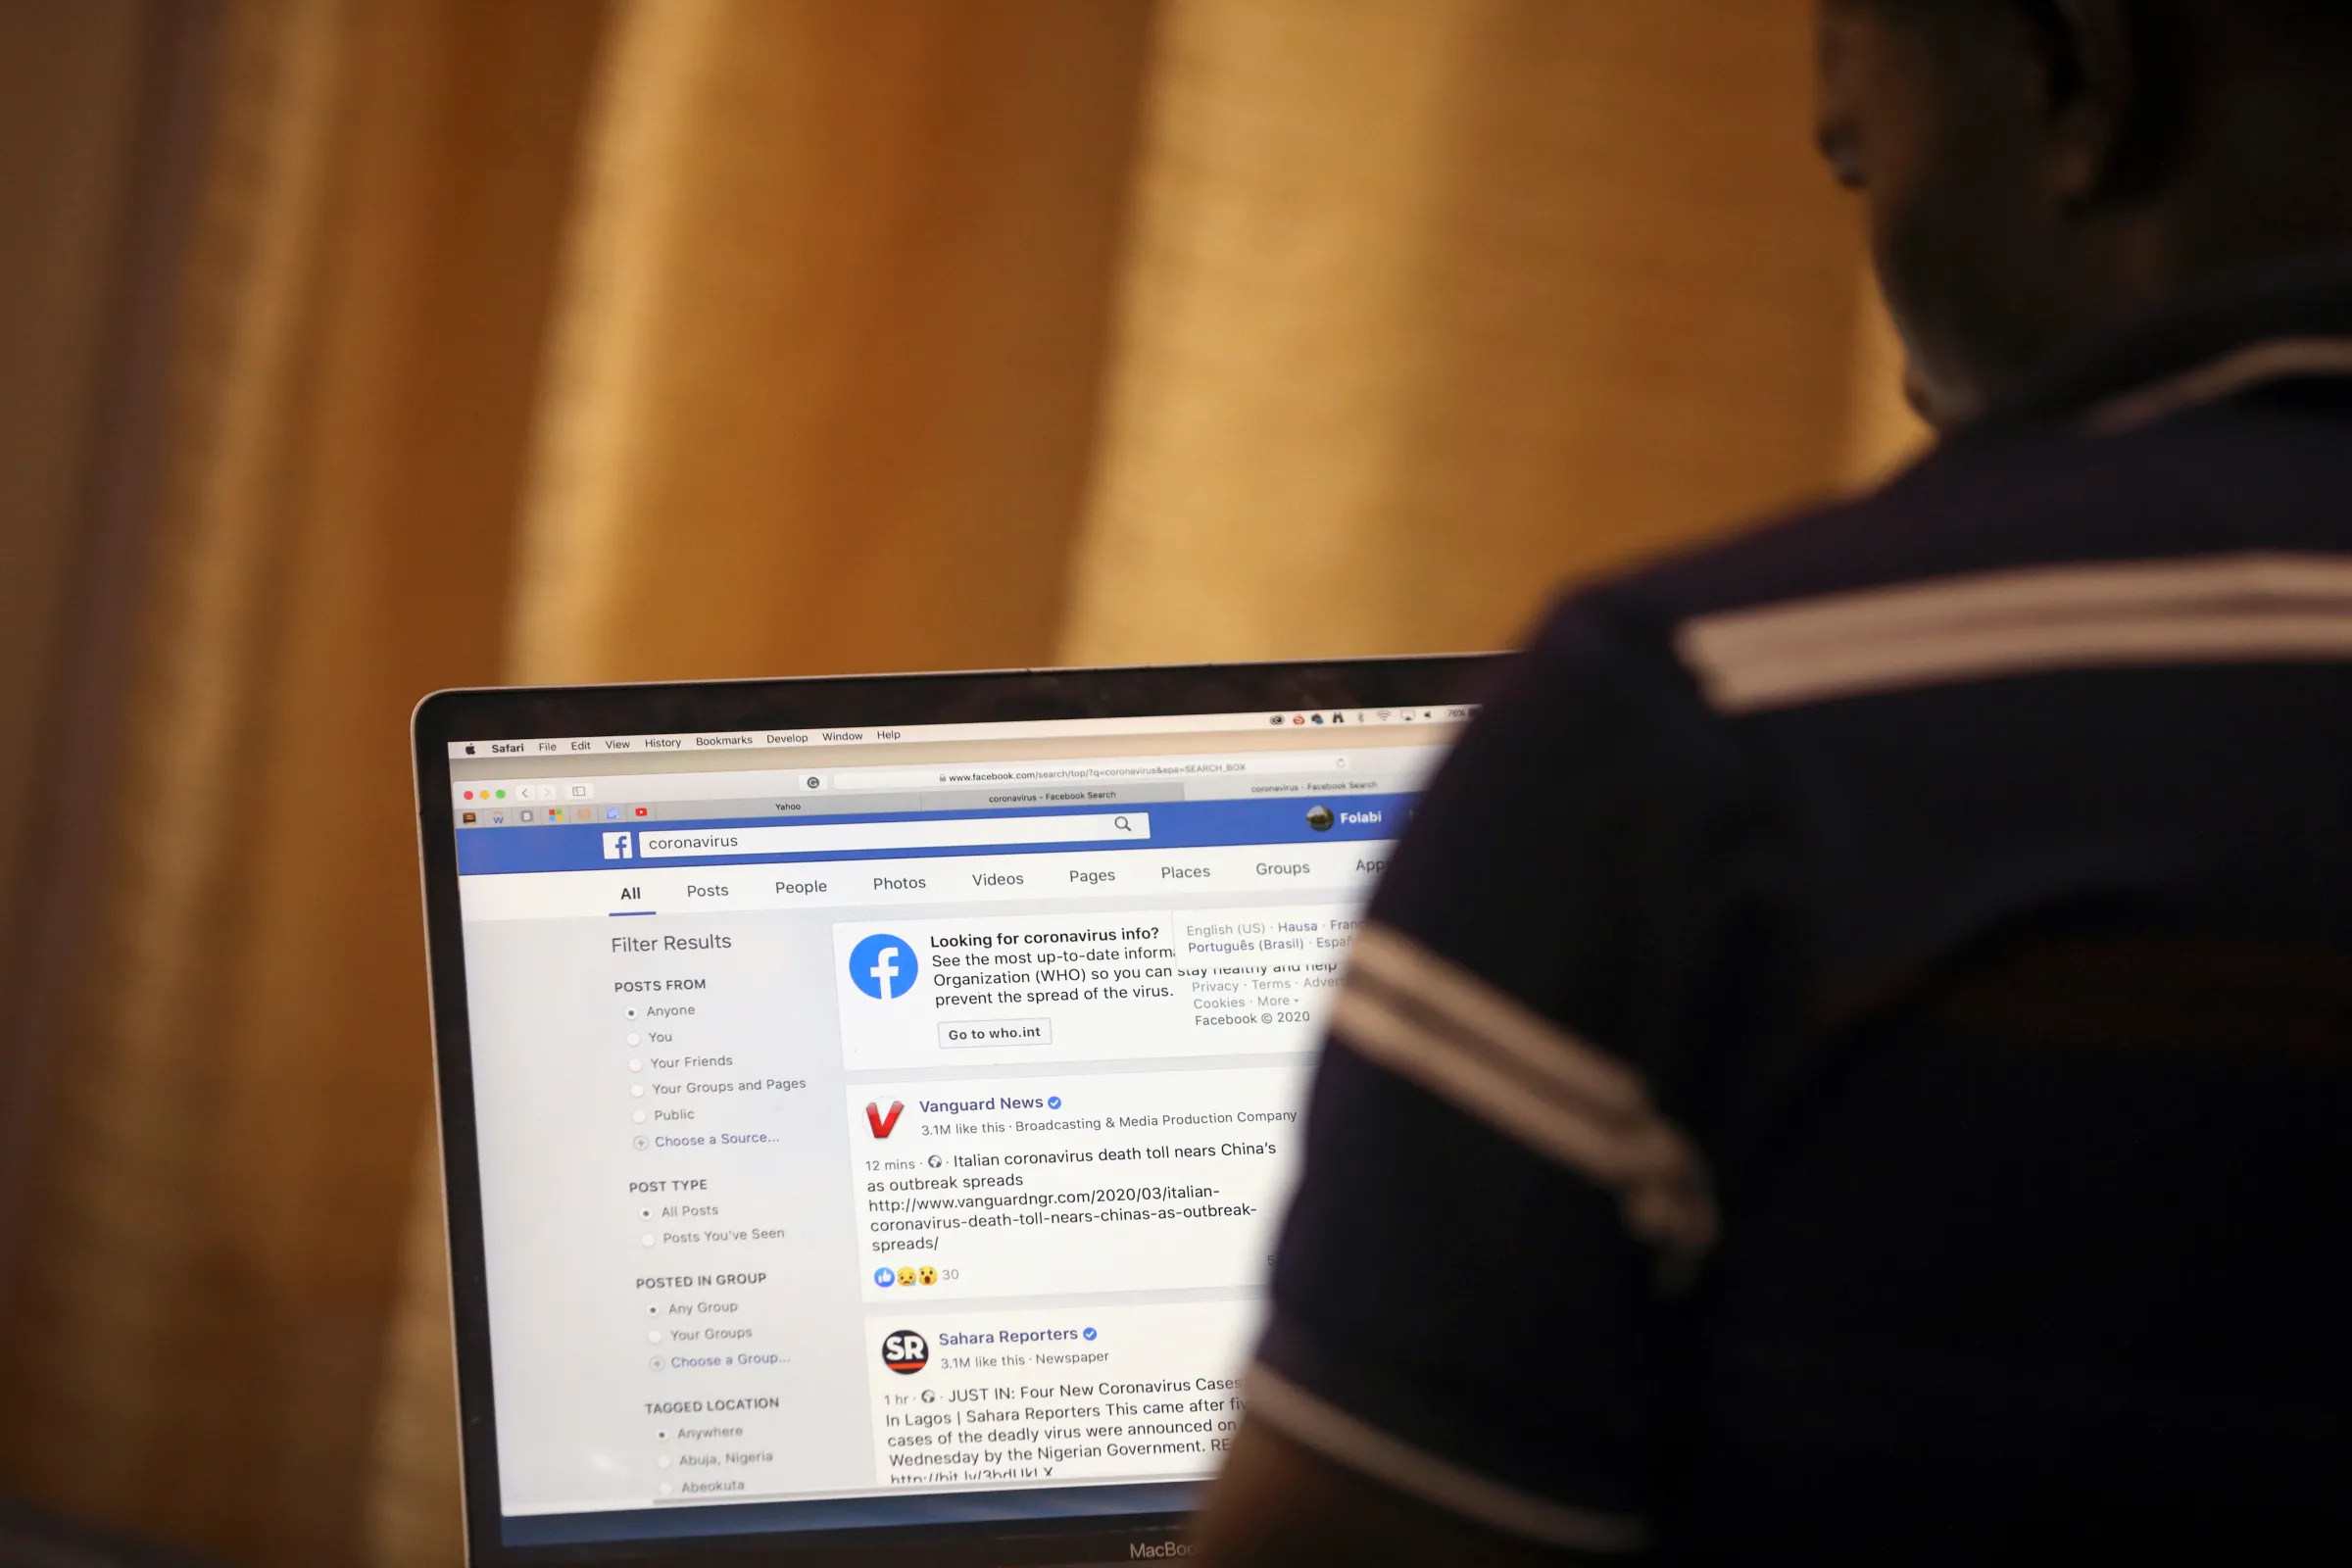 A man with his  back to the camera opens the Facebook page on his computer to fact check coronavirus disease (COVID-19) information, in Abuja, Nigeria March 19, 2020. REUTERS/Afolabi Sotunde